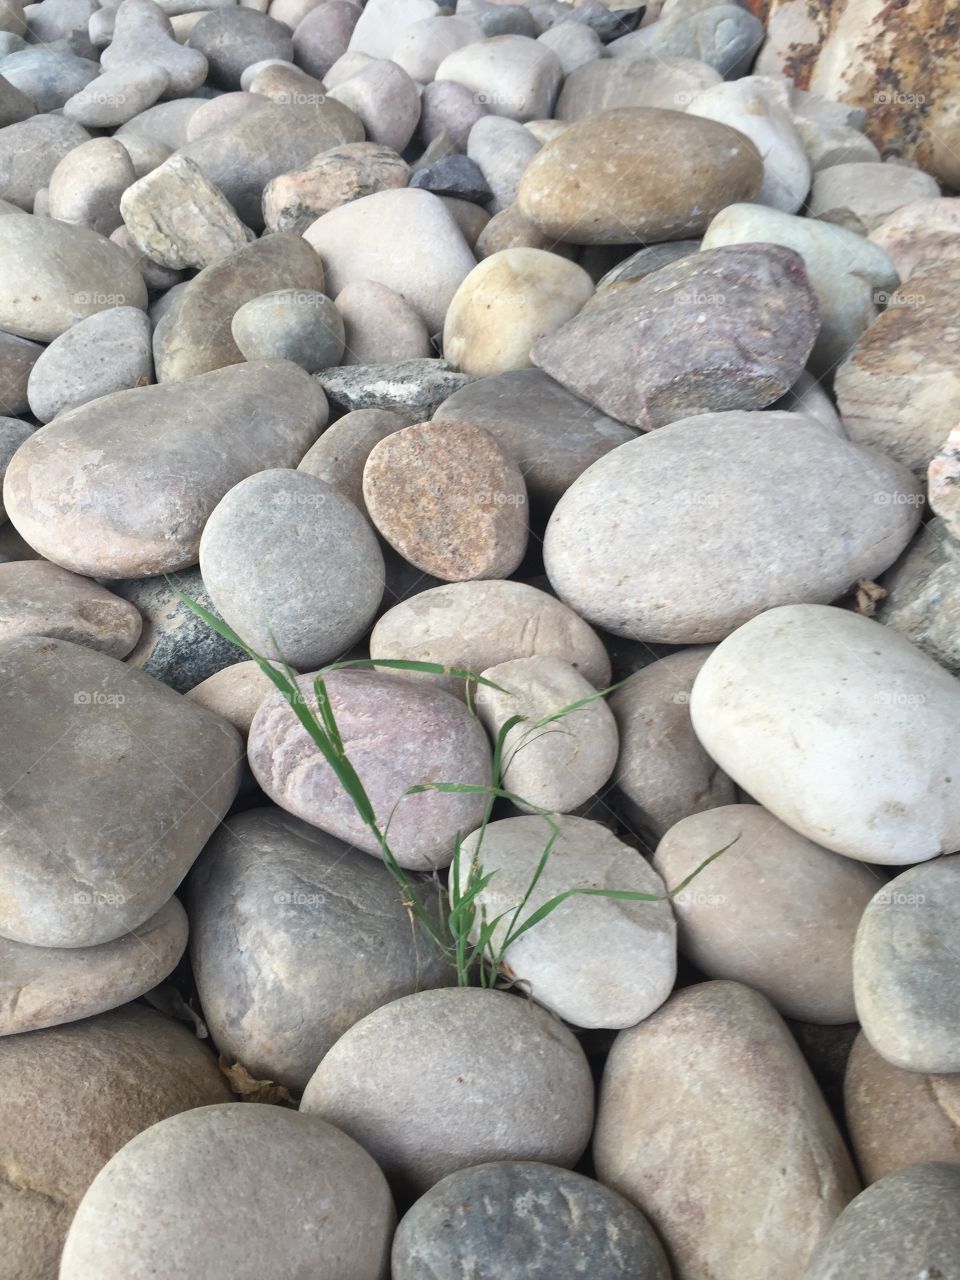 The little plant that could. Grass growing through rocks